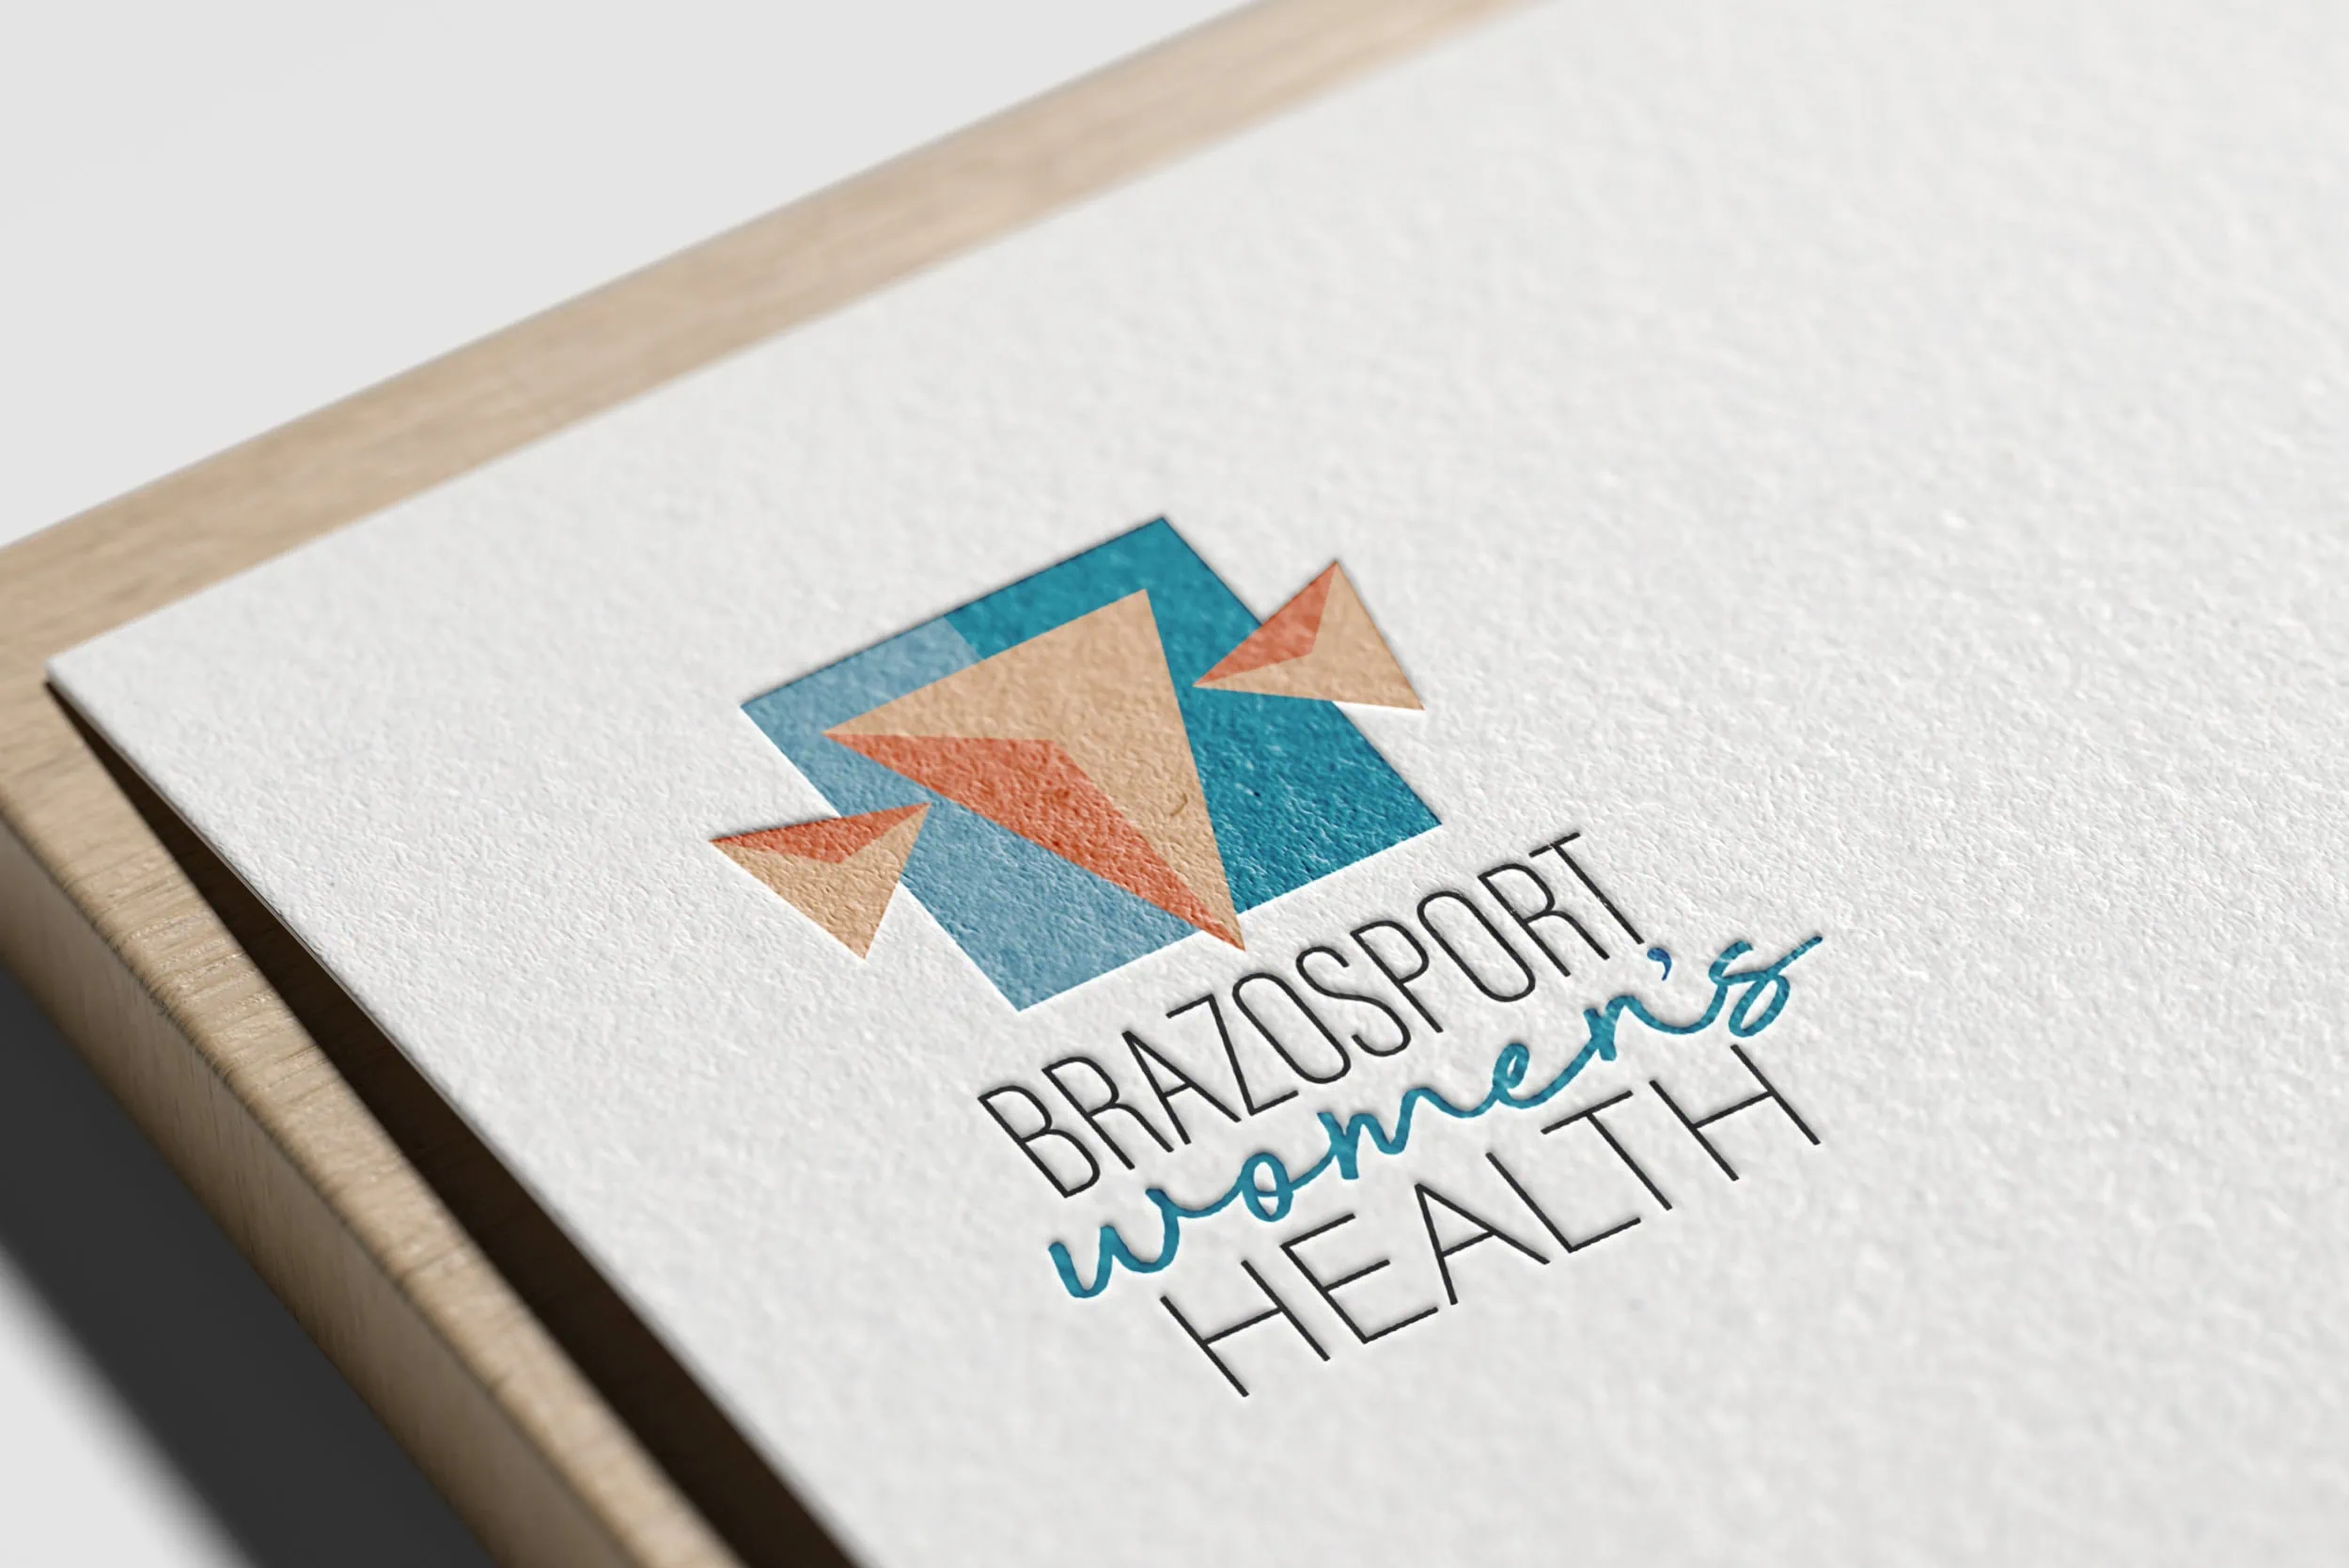 A close-up image reveals a textured white paper featuring the Brazosport Women's Health logo, composed of geometric shapes in blue and orange. The paper rests elegantly on a light wood surface. - Market Design Team: Define. Structure. Expand.